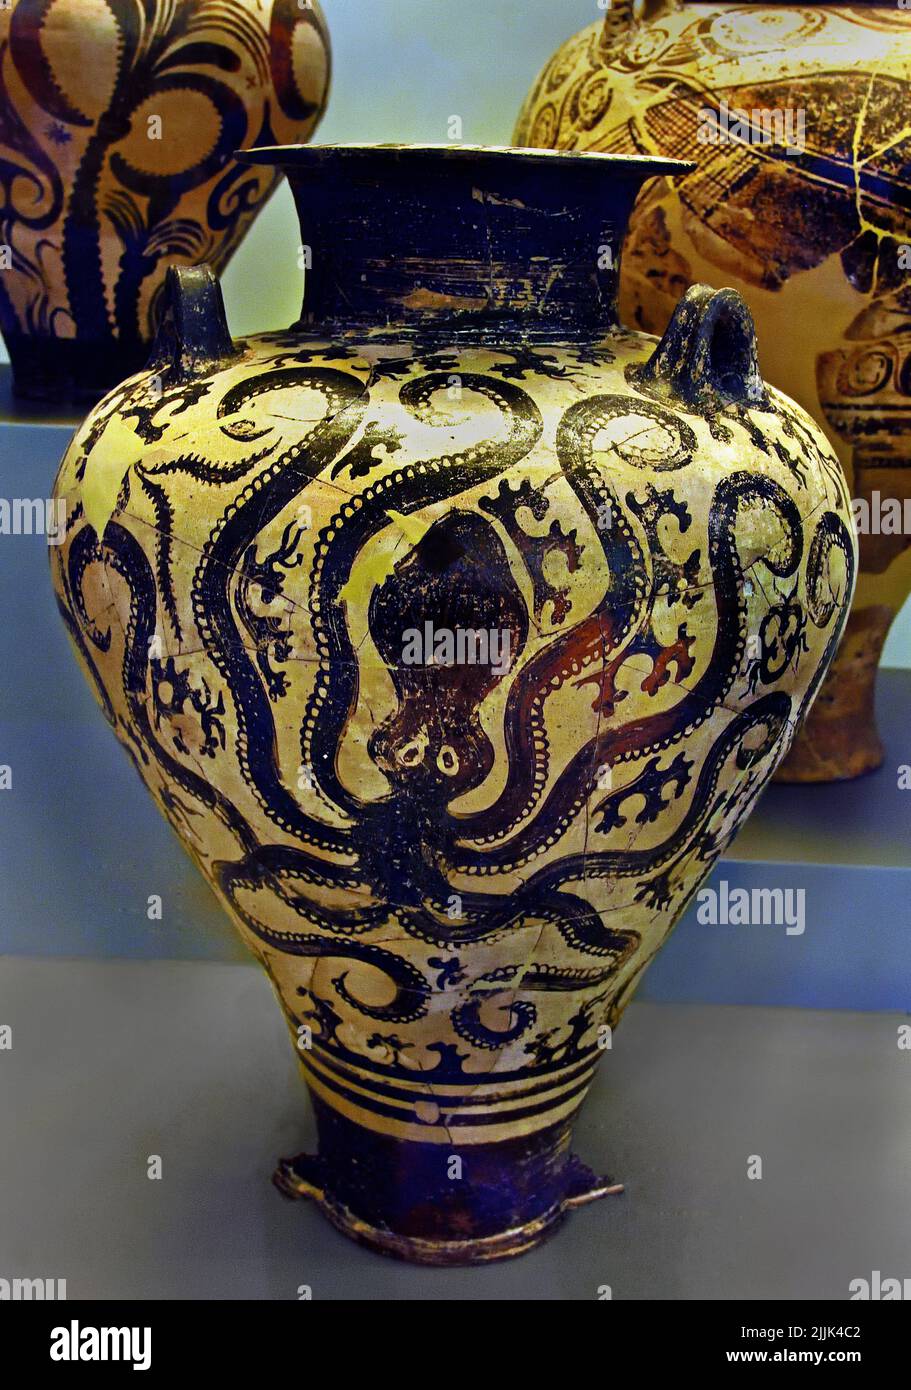 Mycenaean palace amphora with octopus ,15th century BC, It was found in the second grave of the Mycenaean cemetery at Prosymna, near Argos. Mycenaean Greece , Mycenaean civilization, Bronze Age in Ancient Greece 1750 to 1050 BC, Mycenae, National Archaeological Museum in Athens. Stock Photo